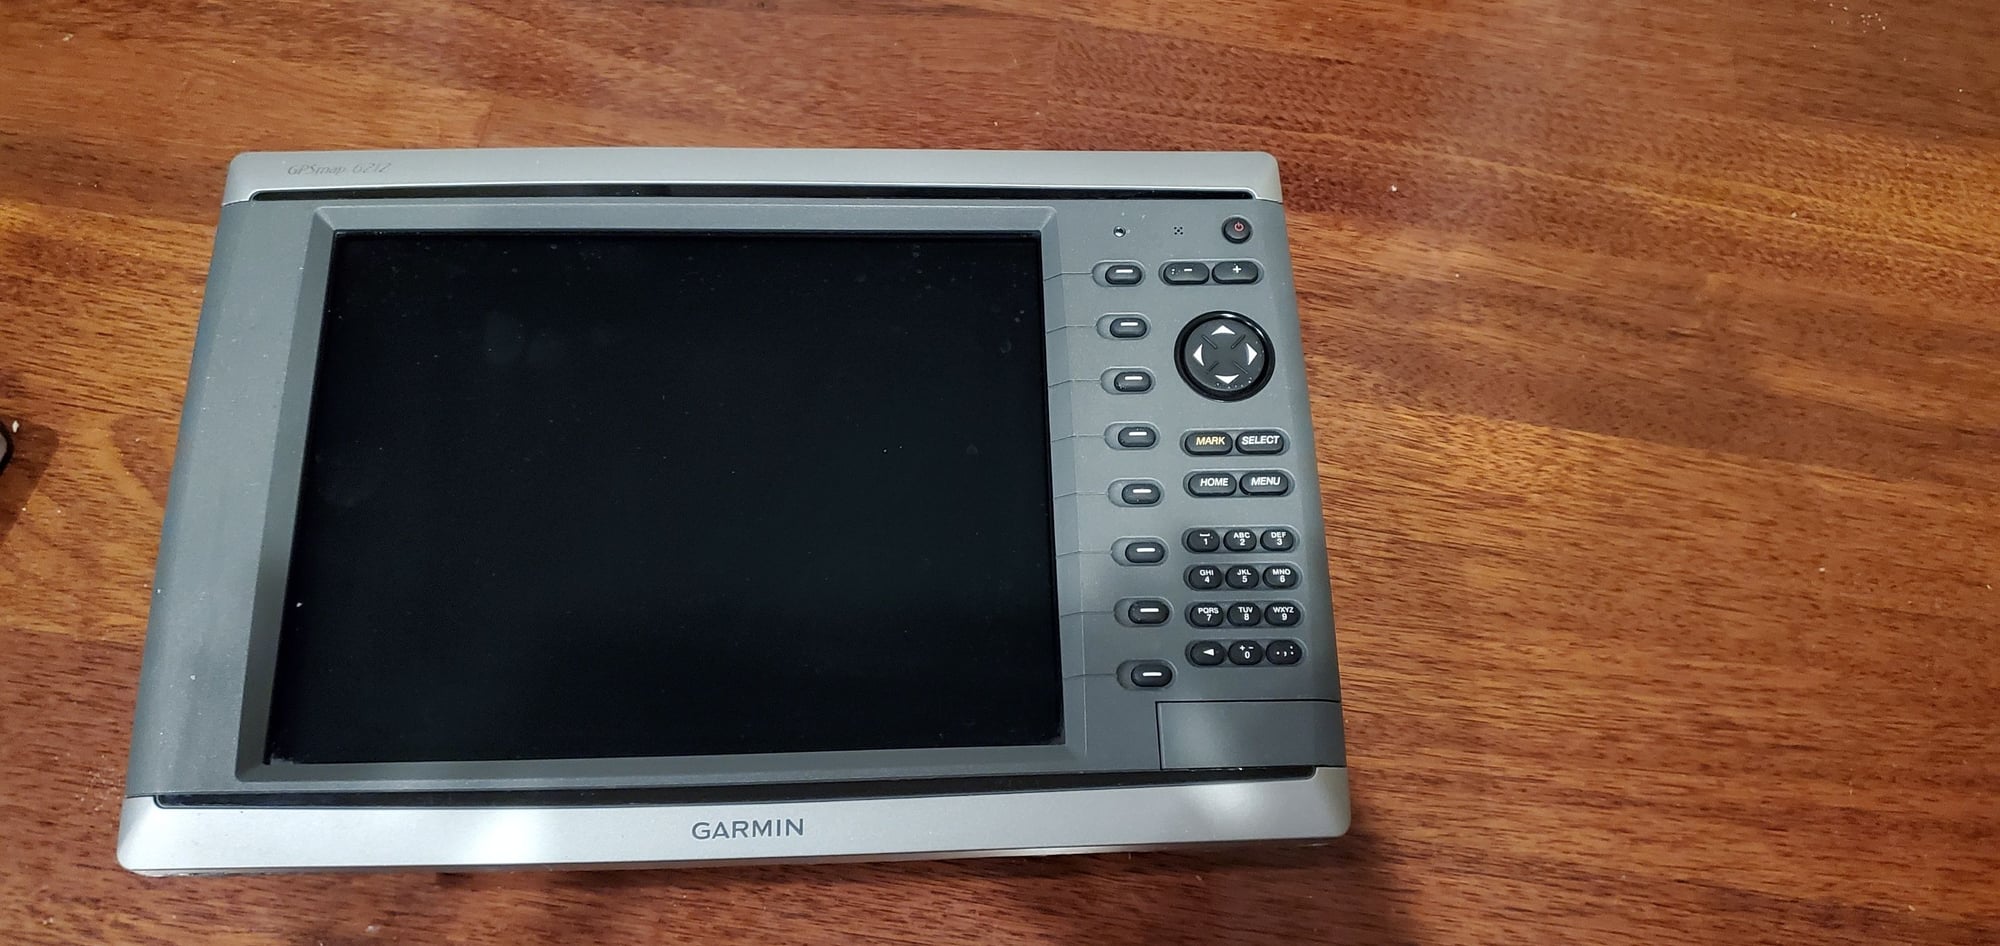 Garmin GSD22, Airmar B60 for sale - The Hull Truth - Boating and Fishing Forum